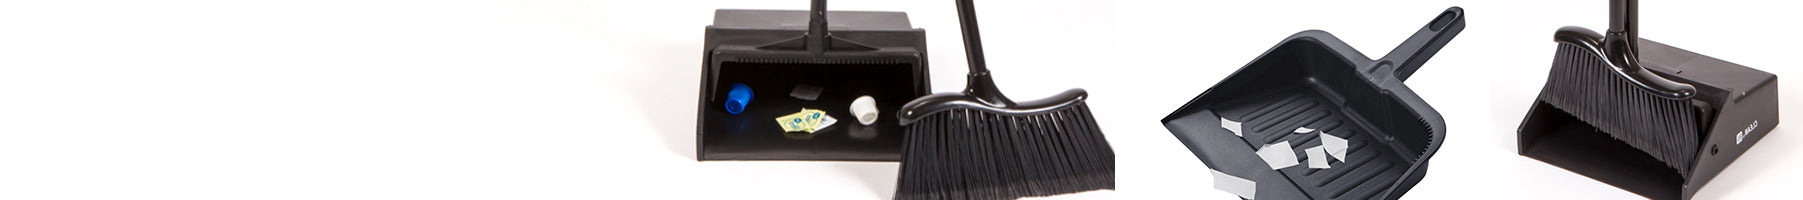 Banner_Janitorial_Cleaning-Tools_Brooms-Dustpans_323